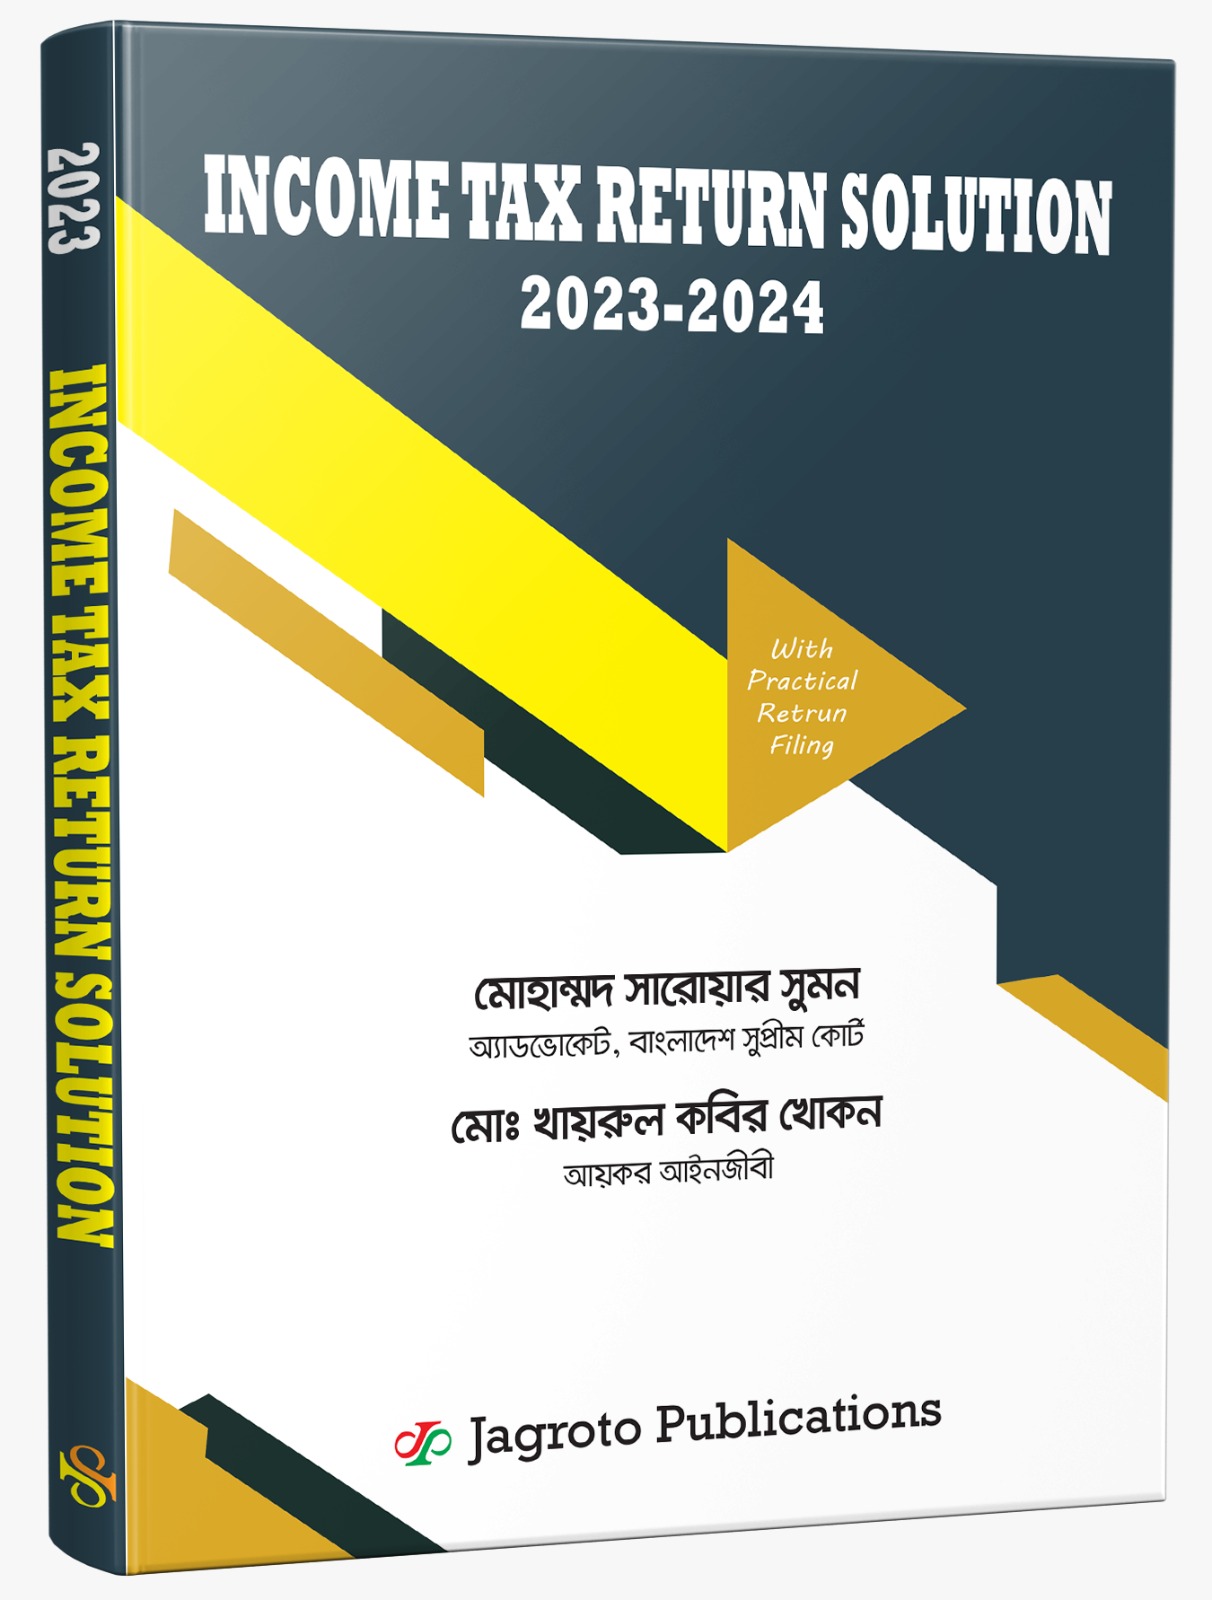 INCOME TAX RETURN SOLUTION